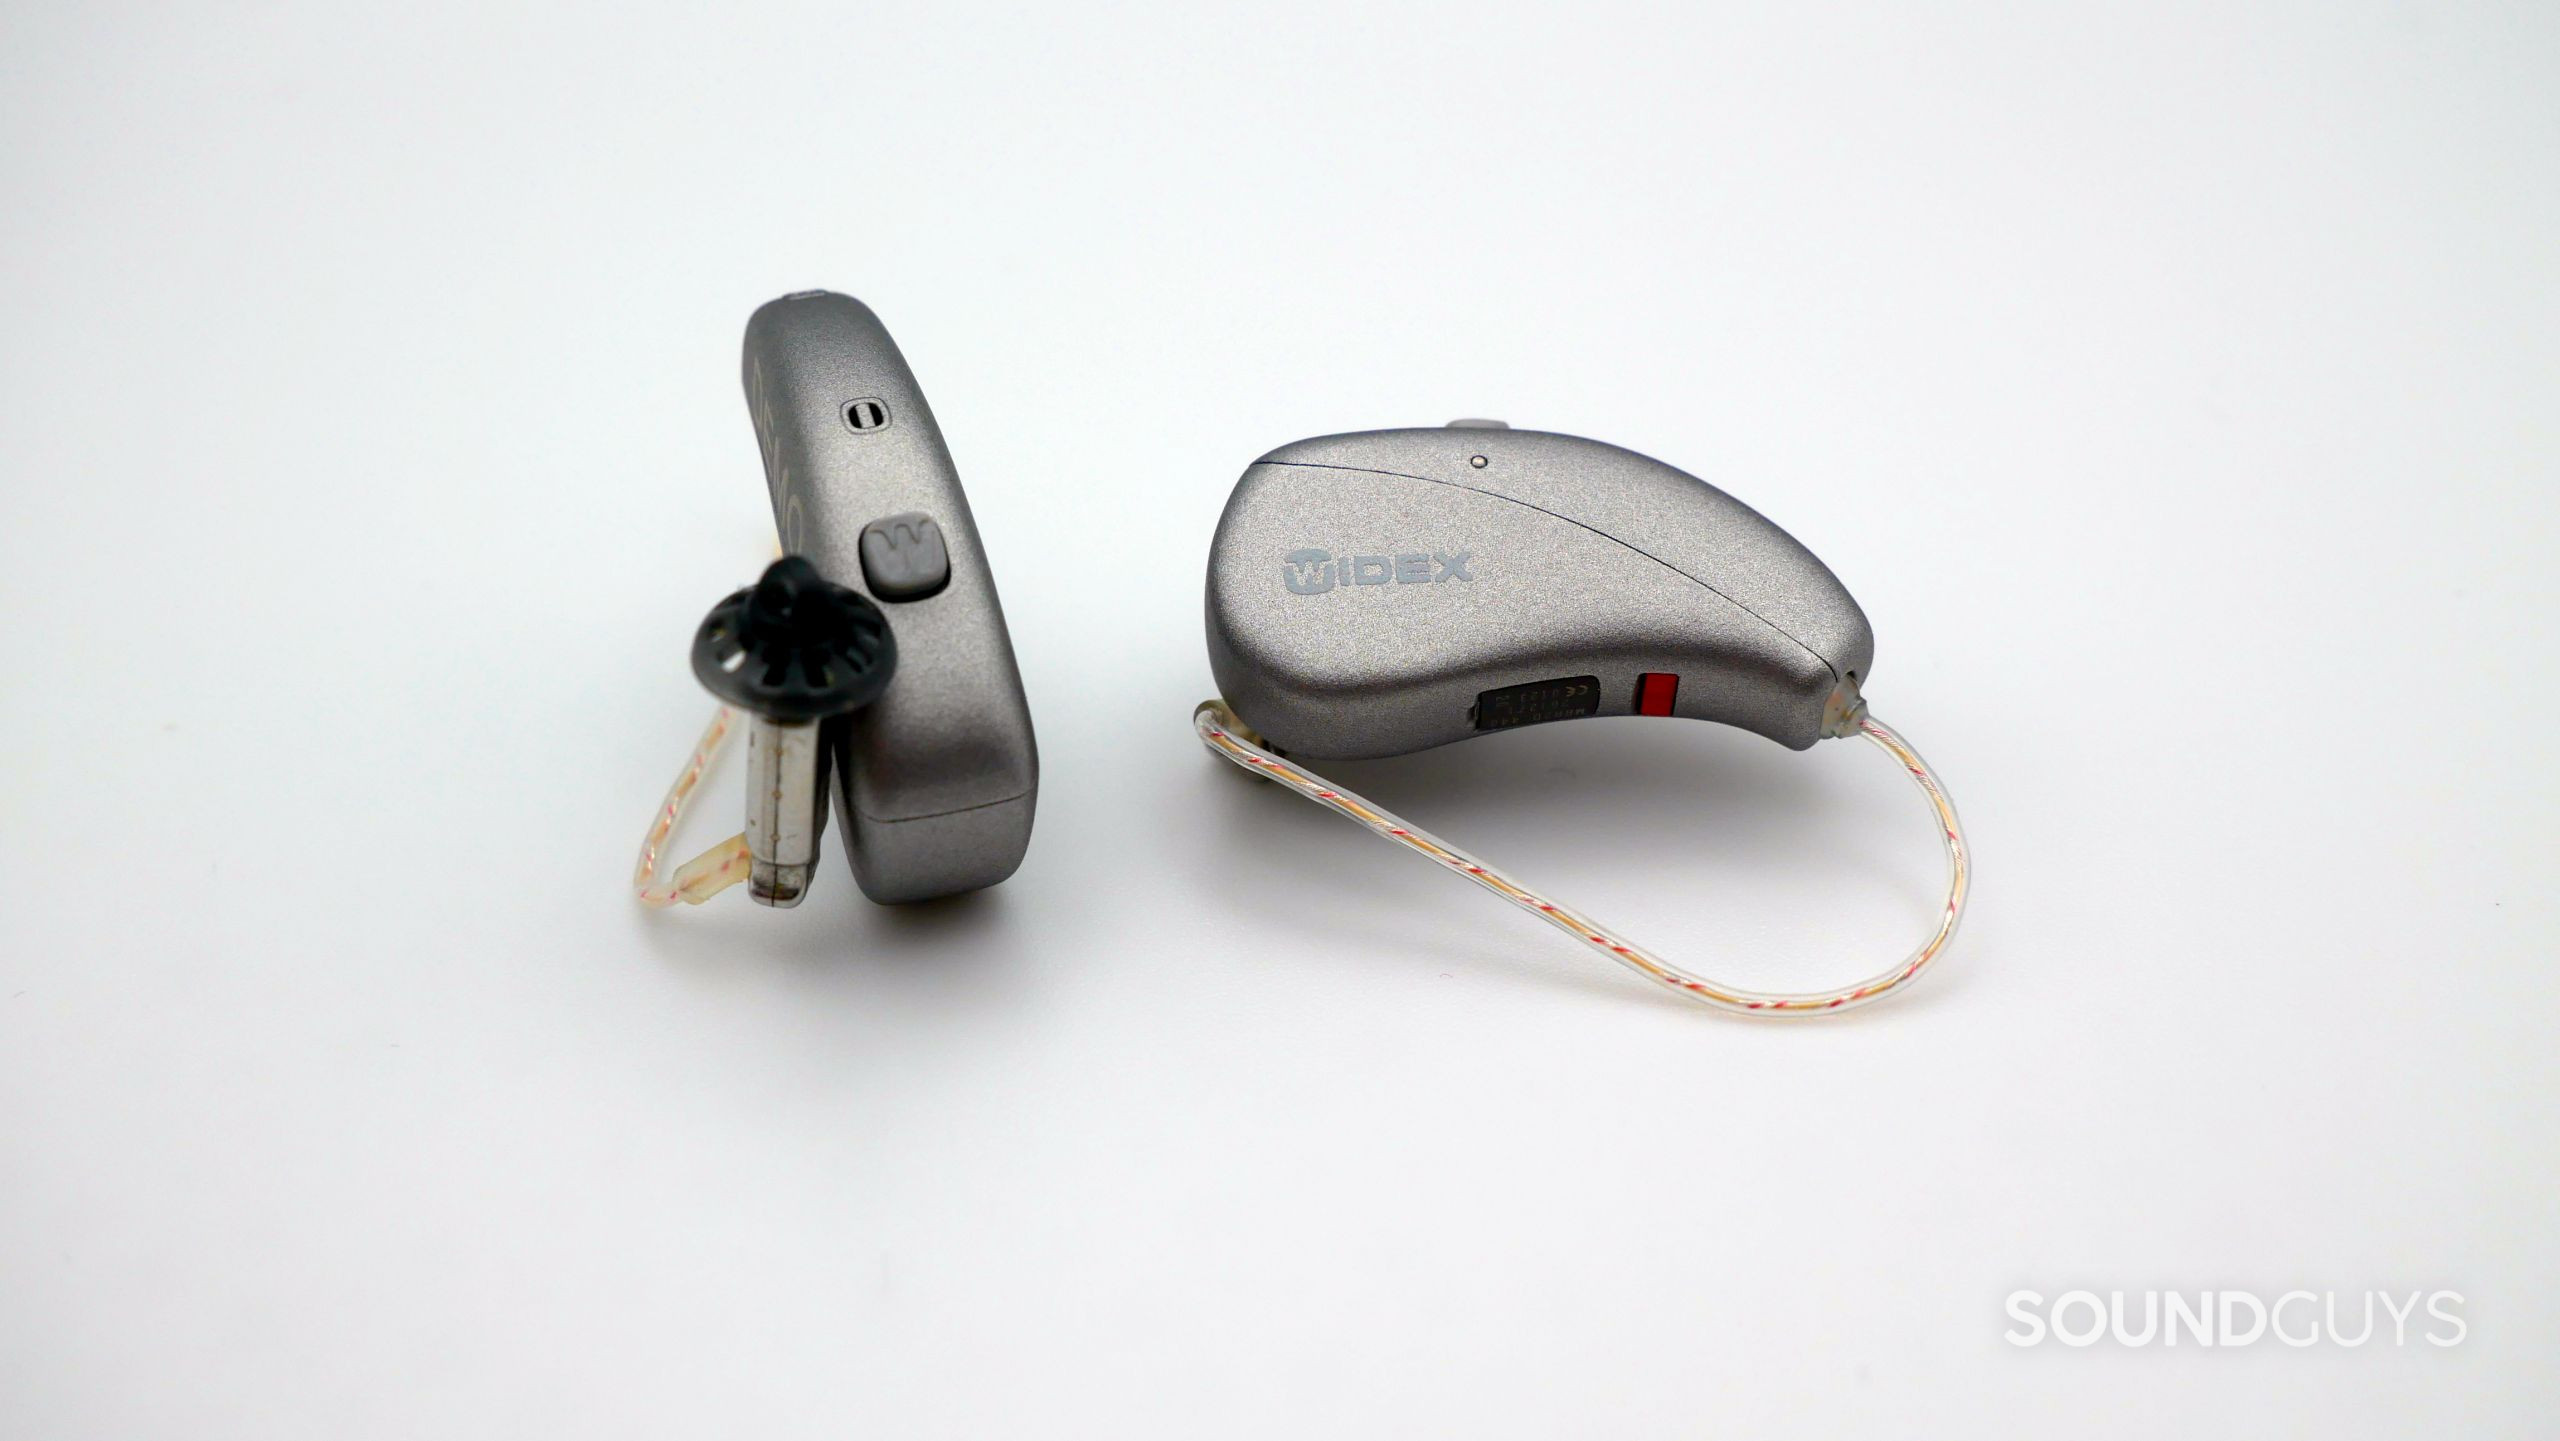 Widex MOMENT hearing aids